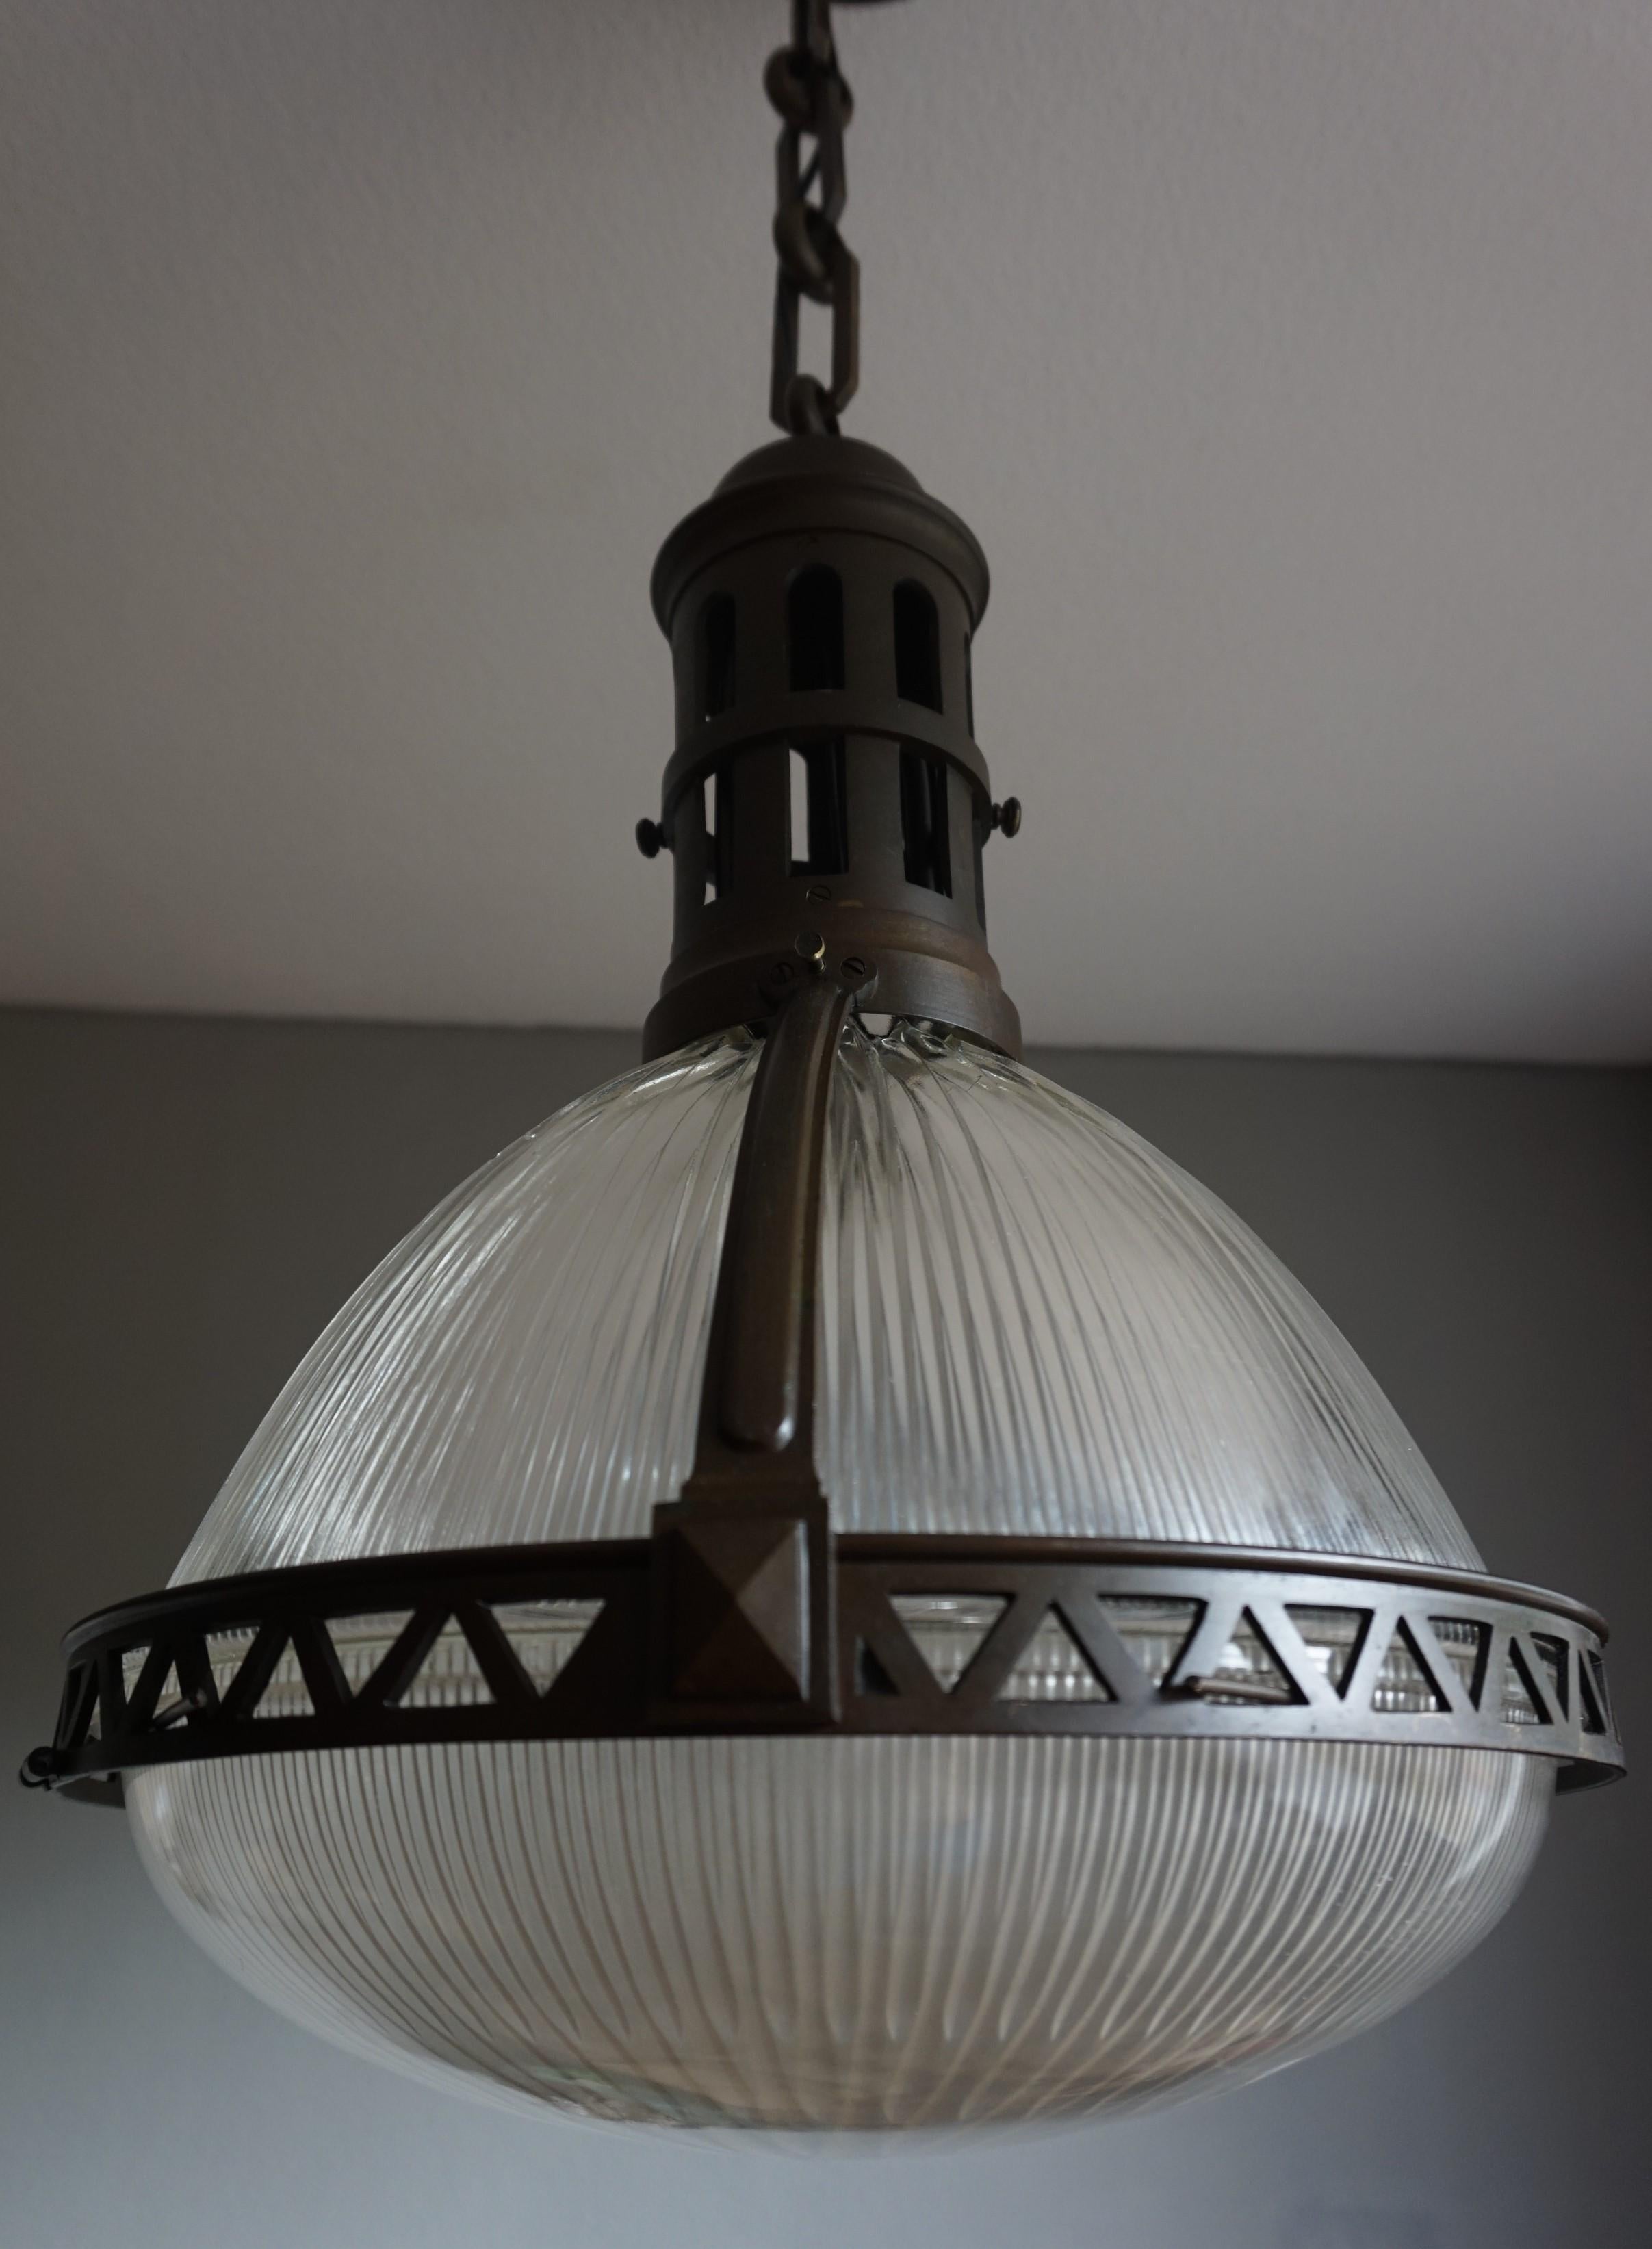 Antique Holophane light fixture, made in France.

You are looking at a beautiful, very rare and top quality Holophane pendant and chances are that you have never seen this type or size before. However, if you are looking for a completely original